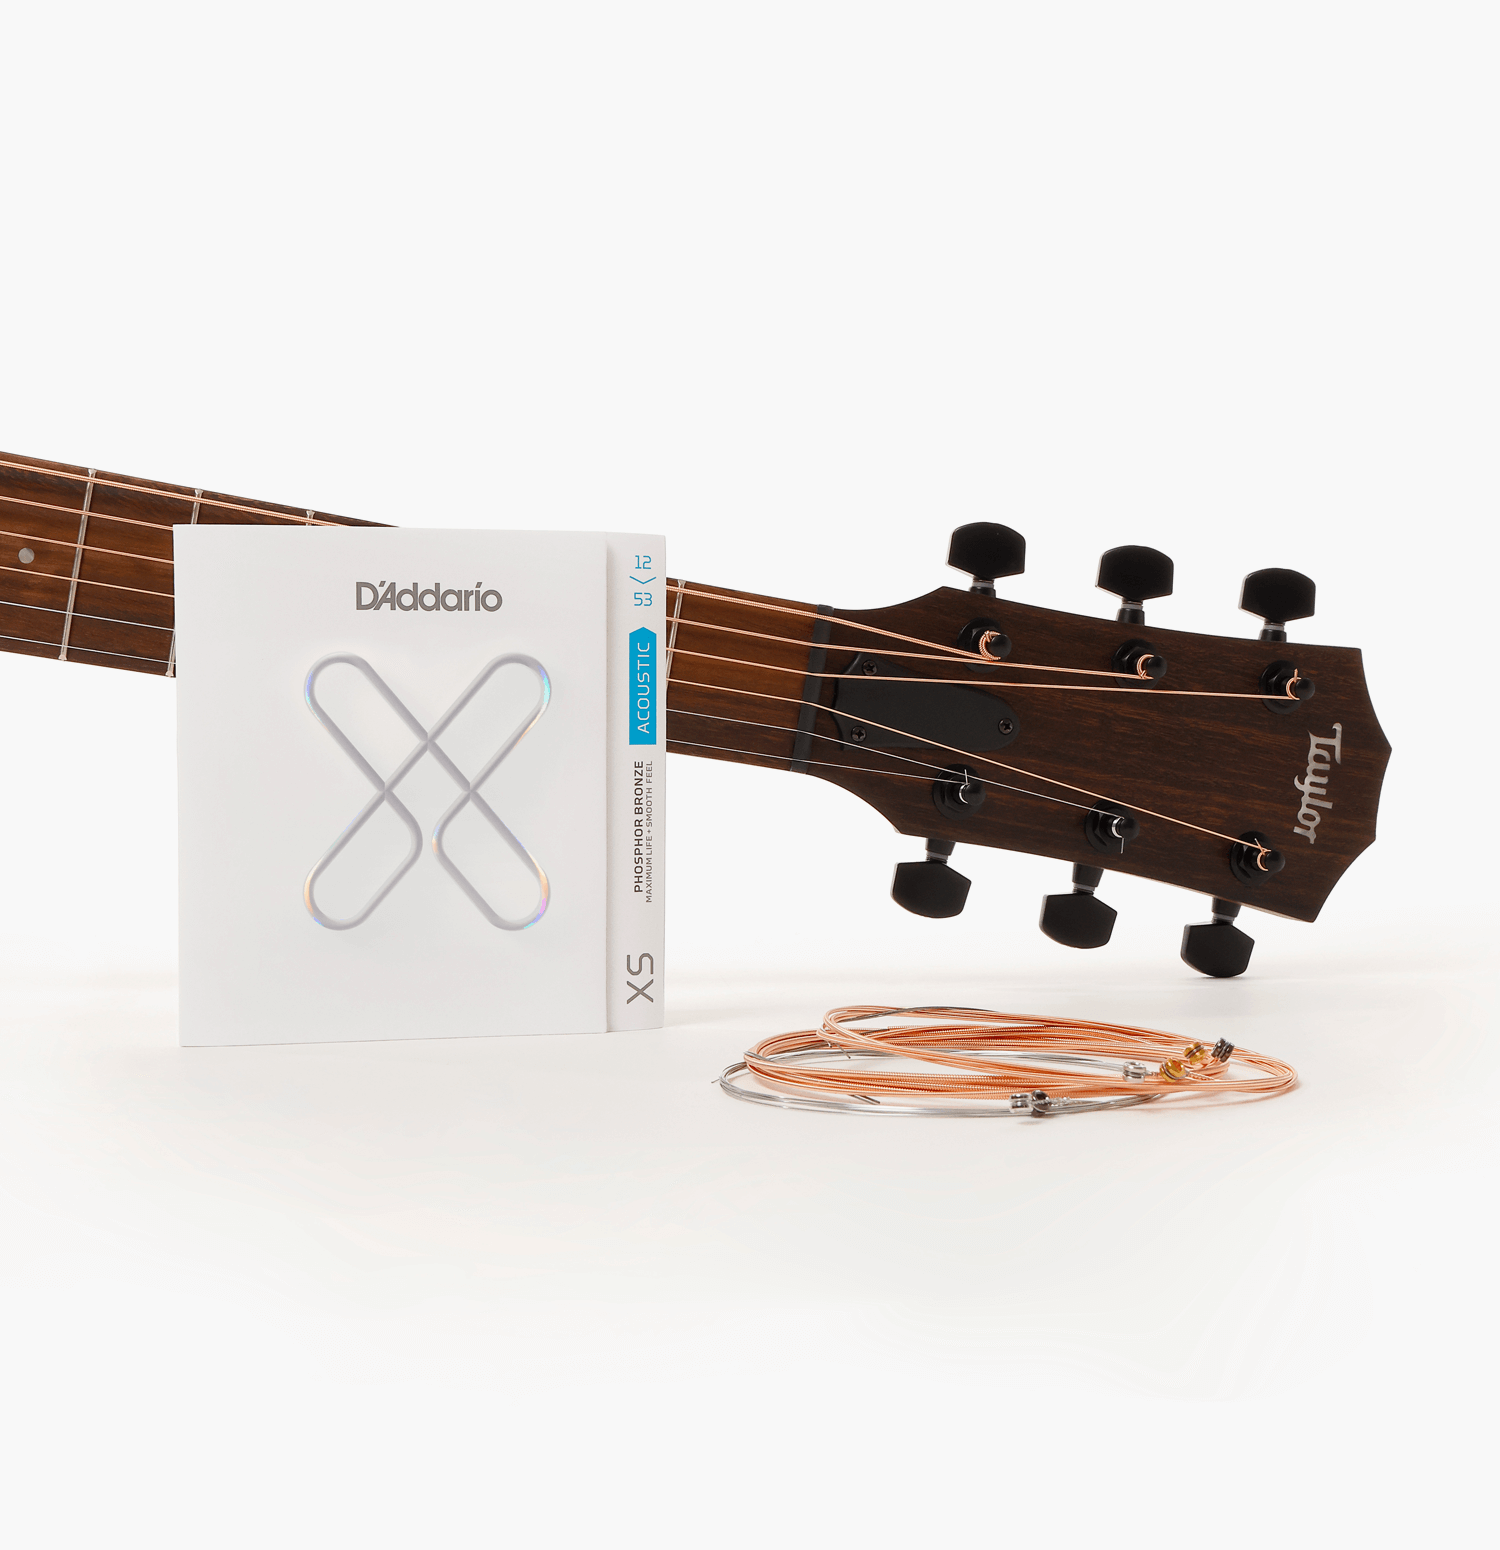 XS Phosphor Bronze acoustic strings with Taylor guitar